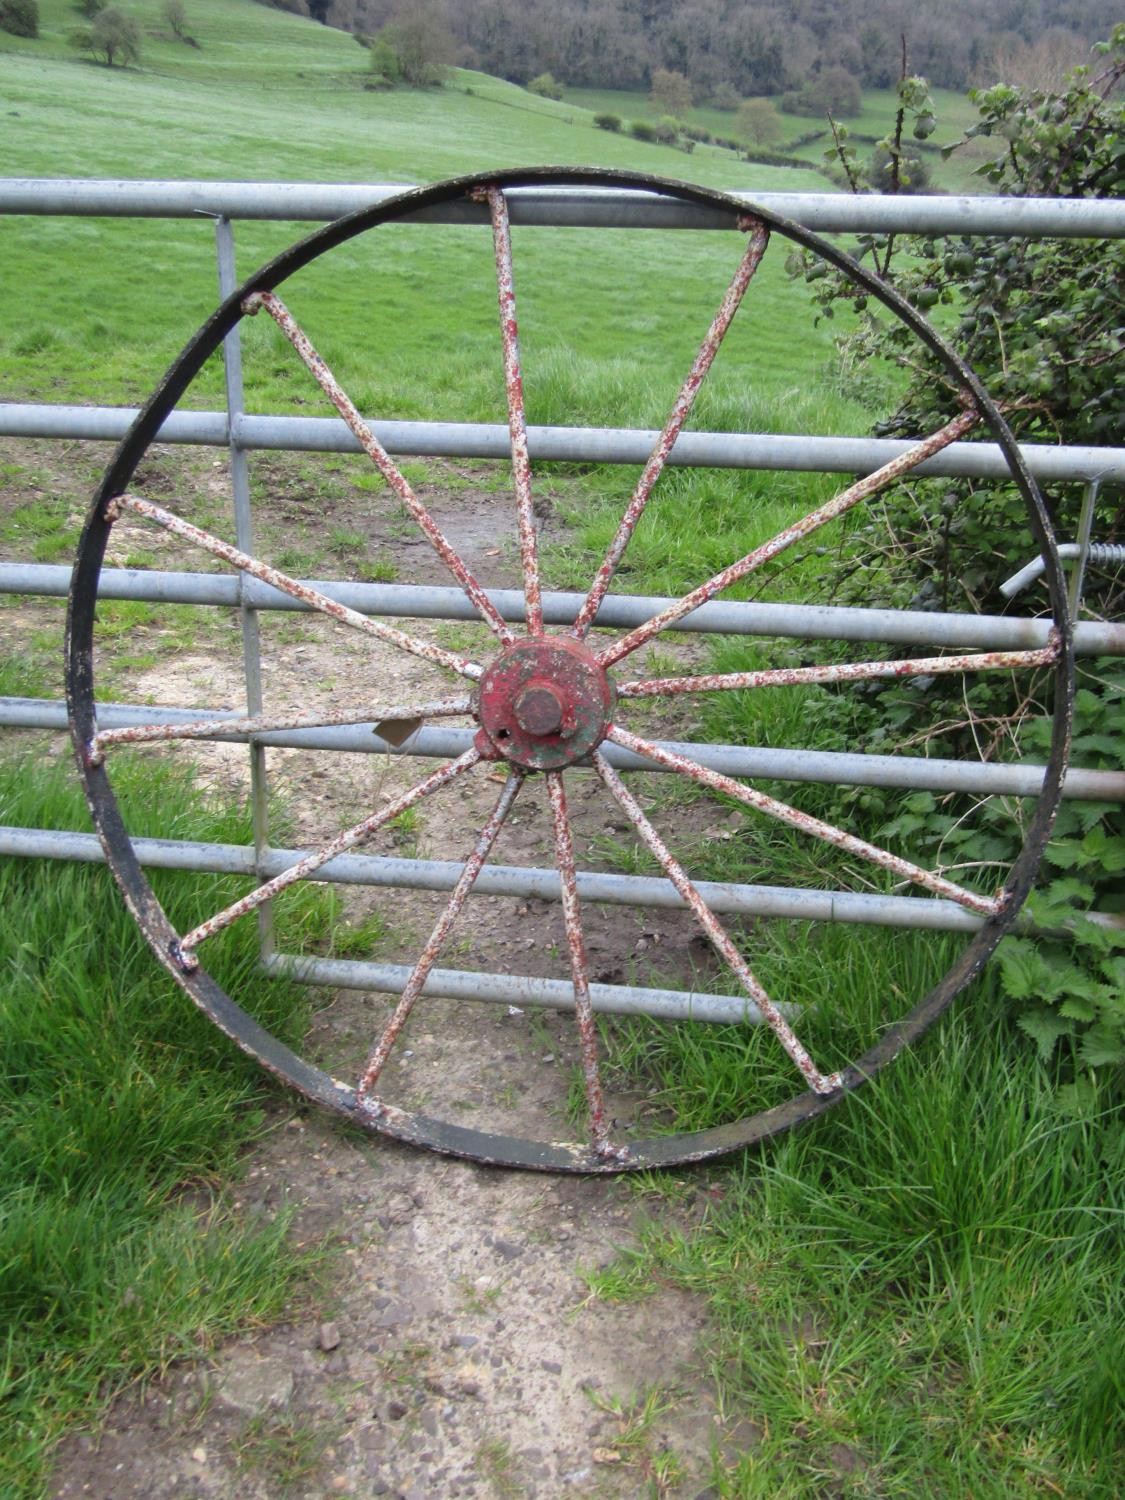 A large antique iron implement wheel with traces of layers of painted finish 122 cm (4ft diameter) - Image 3 of 3